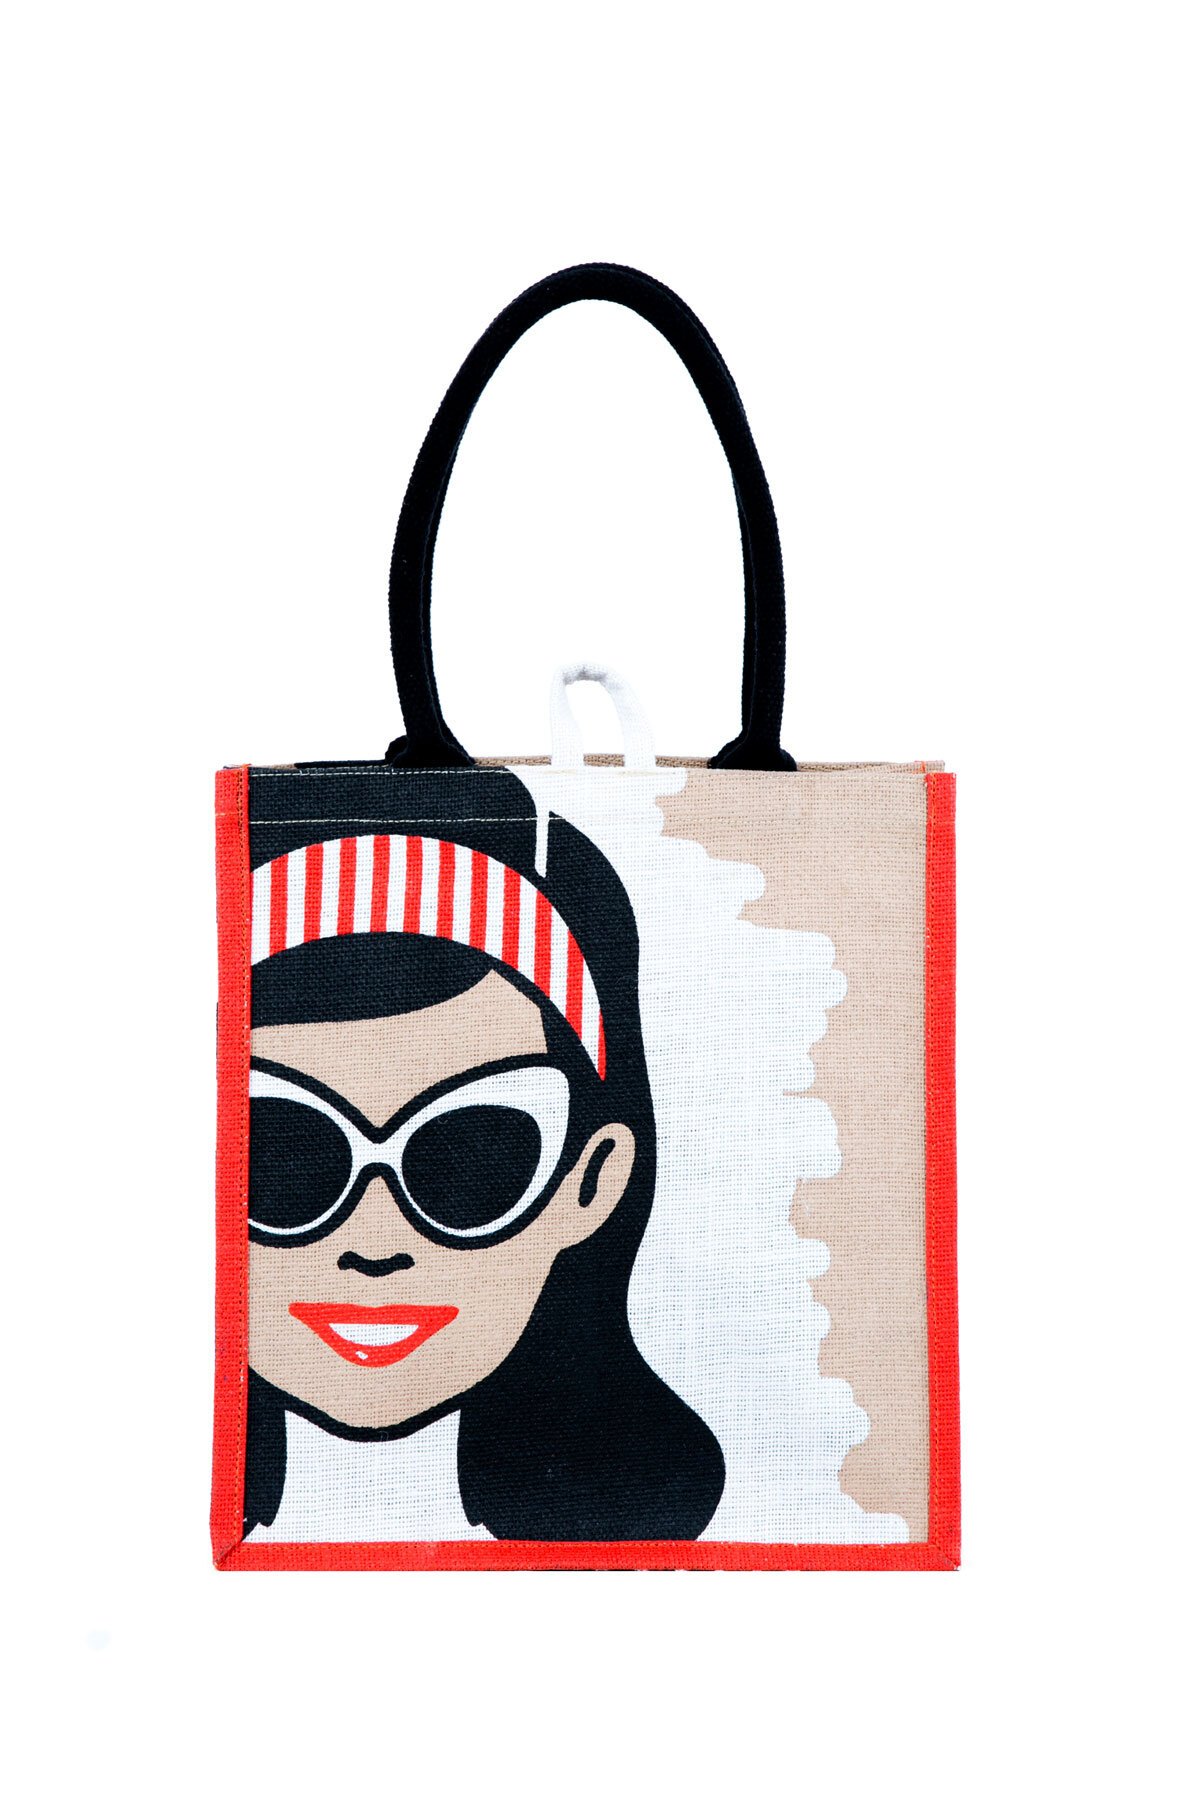 FASHIONISTA Eco Bag *5 PACK * - Home & Gift-New In : Trelise Cooper ...